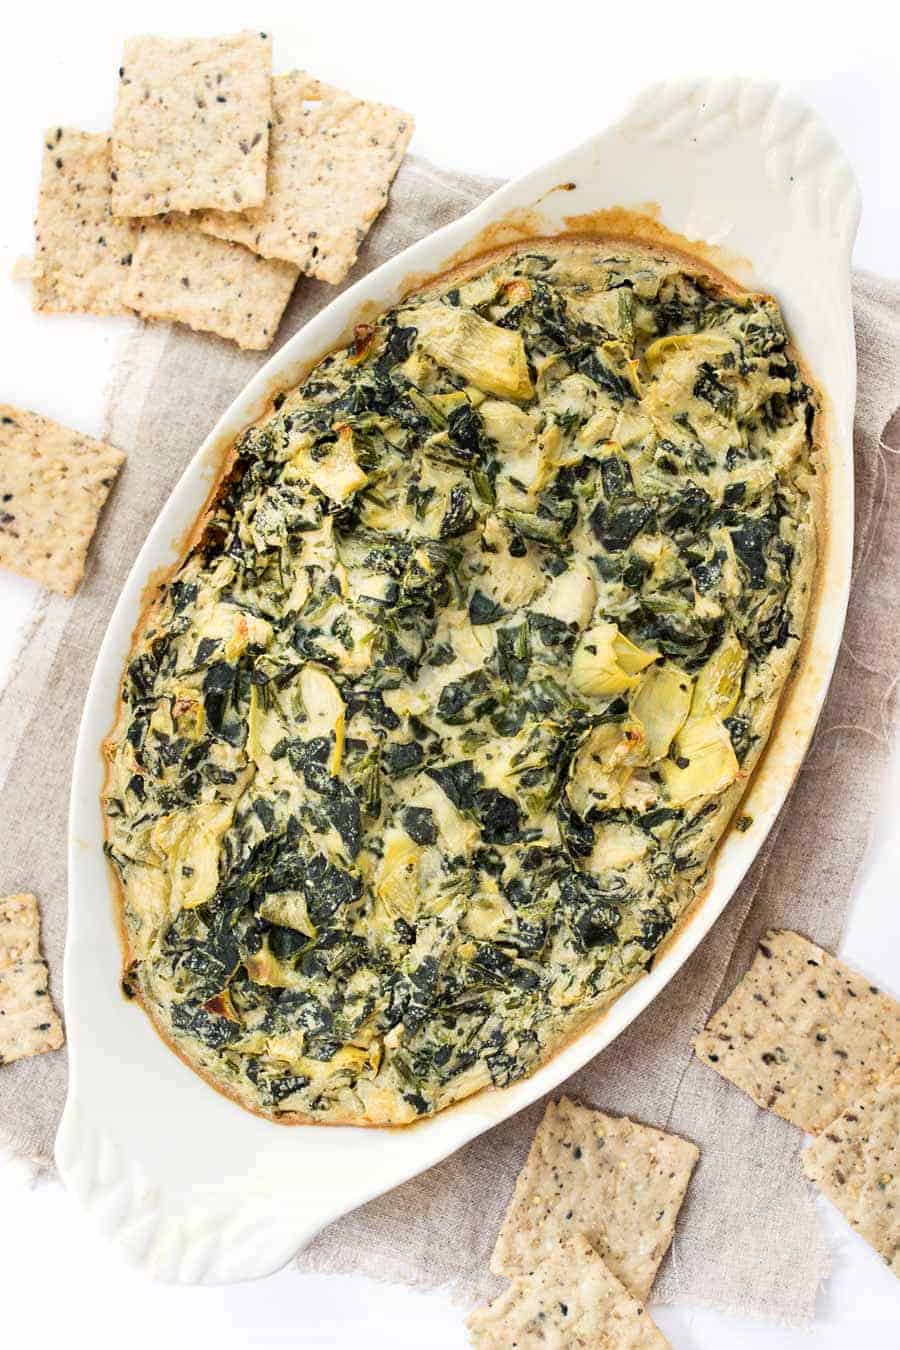 A casserole dish full of spinach artichoke dip, surrounded by crackers